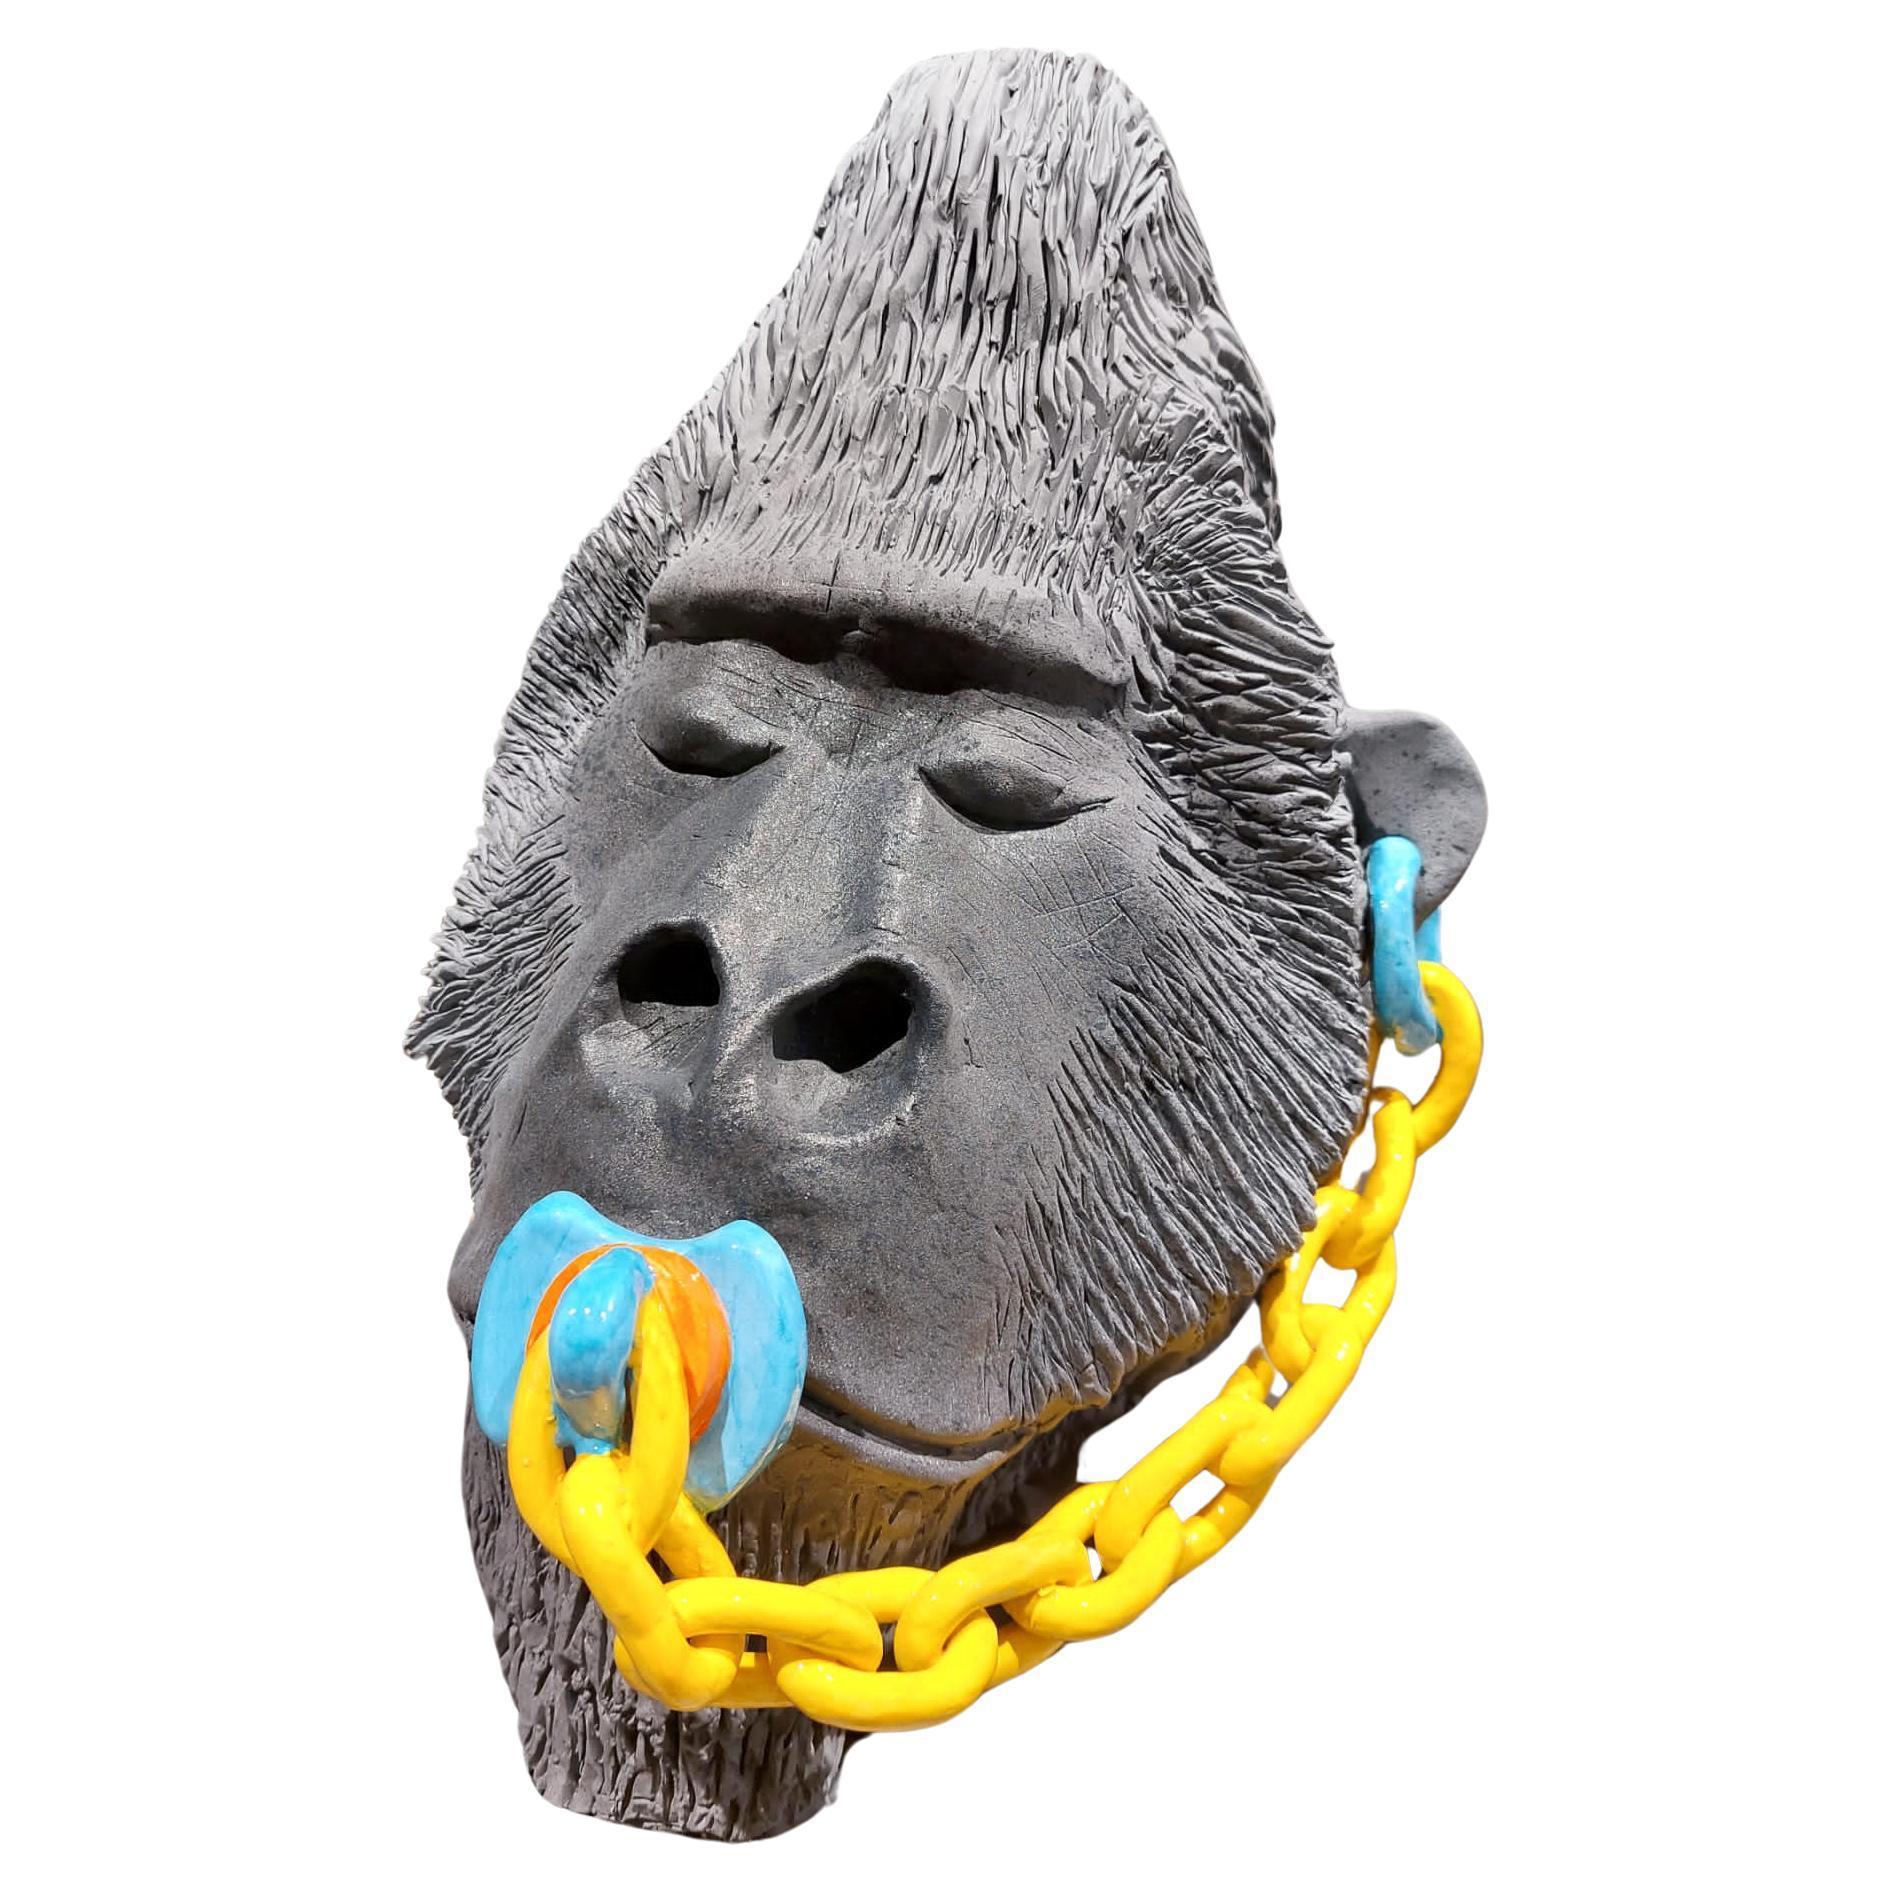 Baby Gorilla Pacifier Ceramic Centerpiece Handmade in Italy Without Mold, 2023